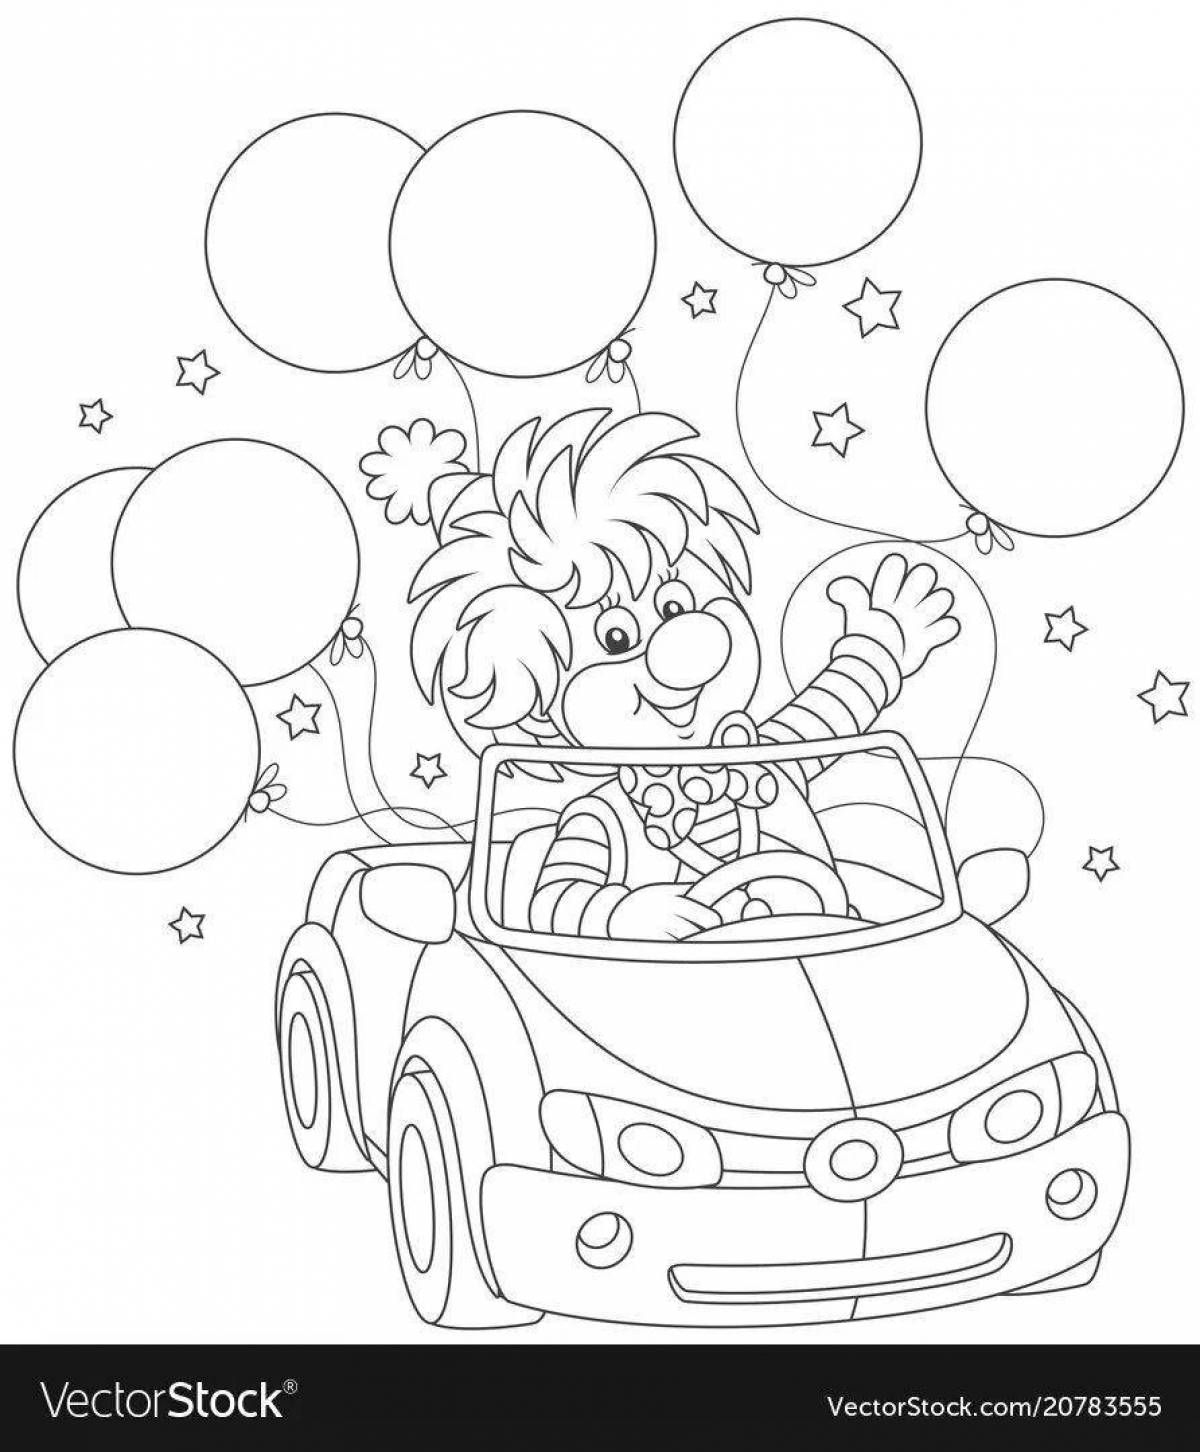 Dizzy clown with balloons